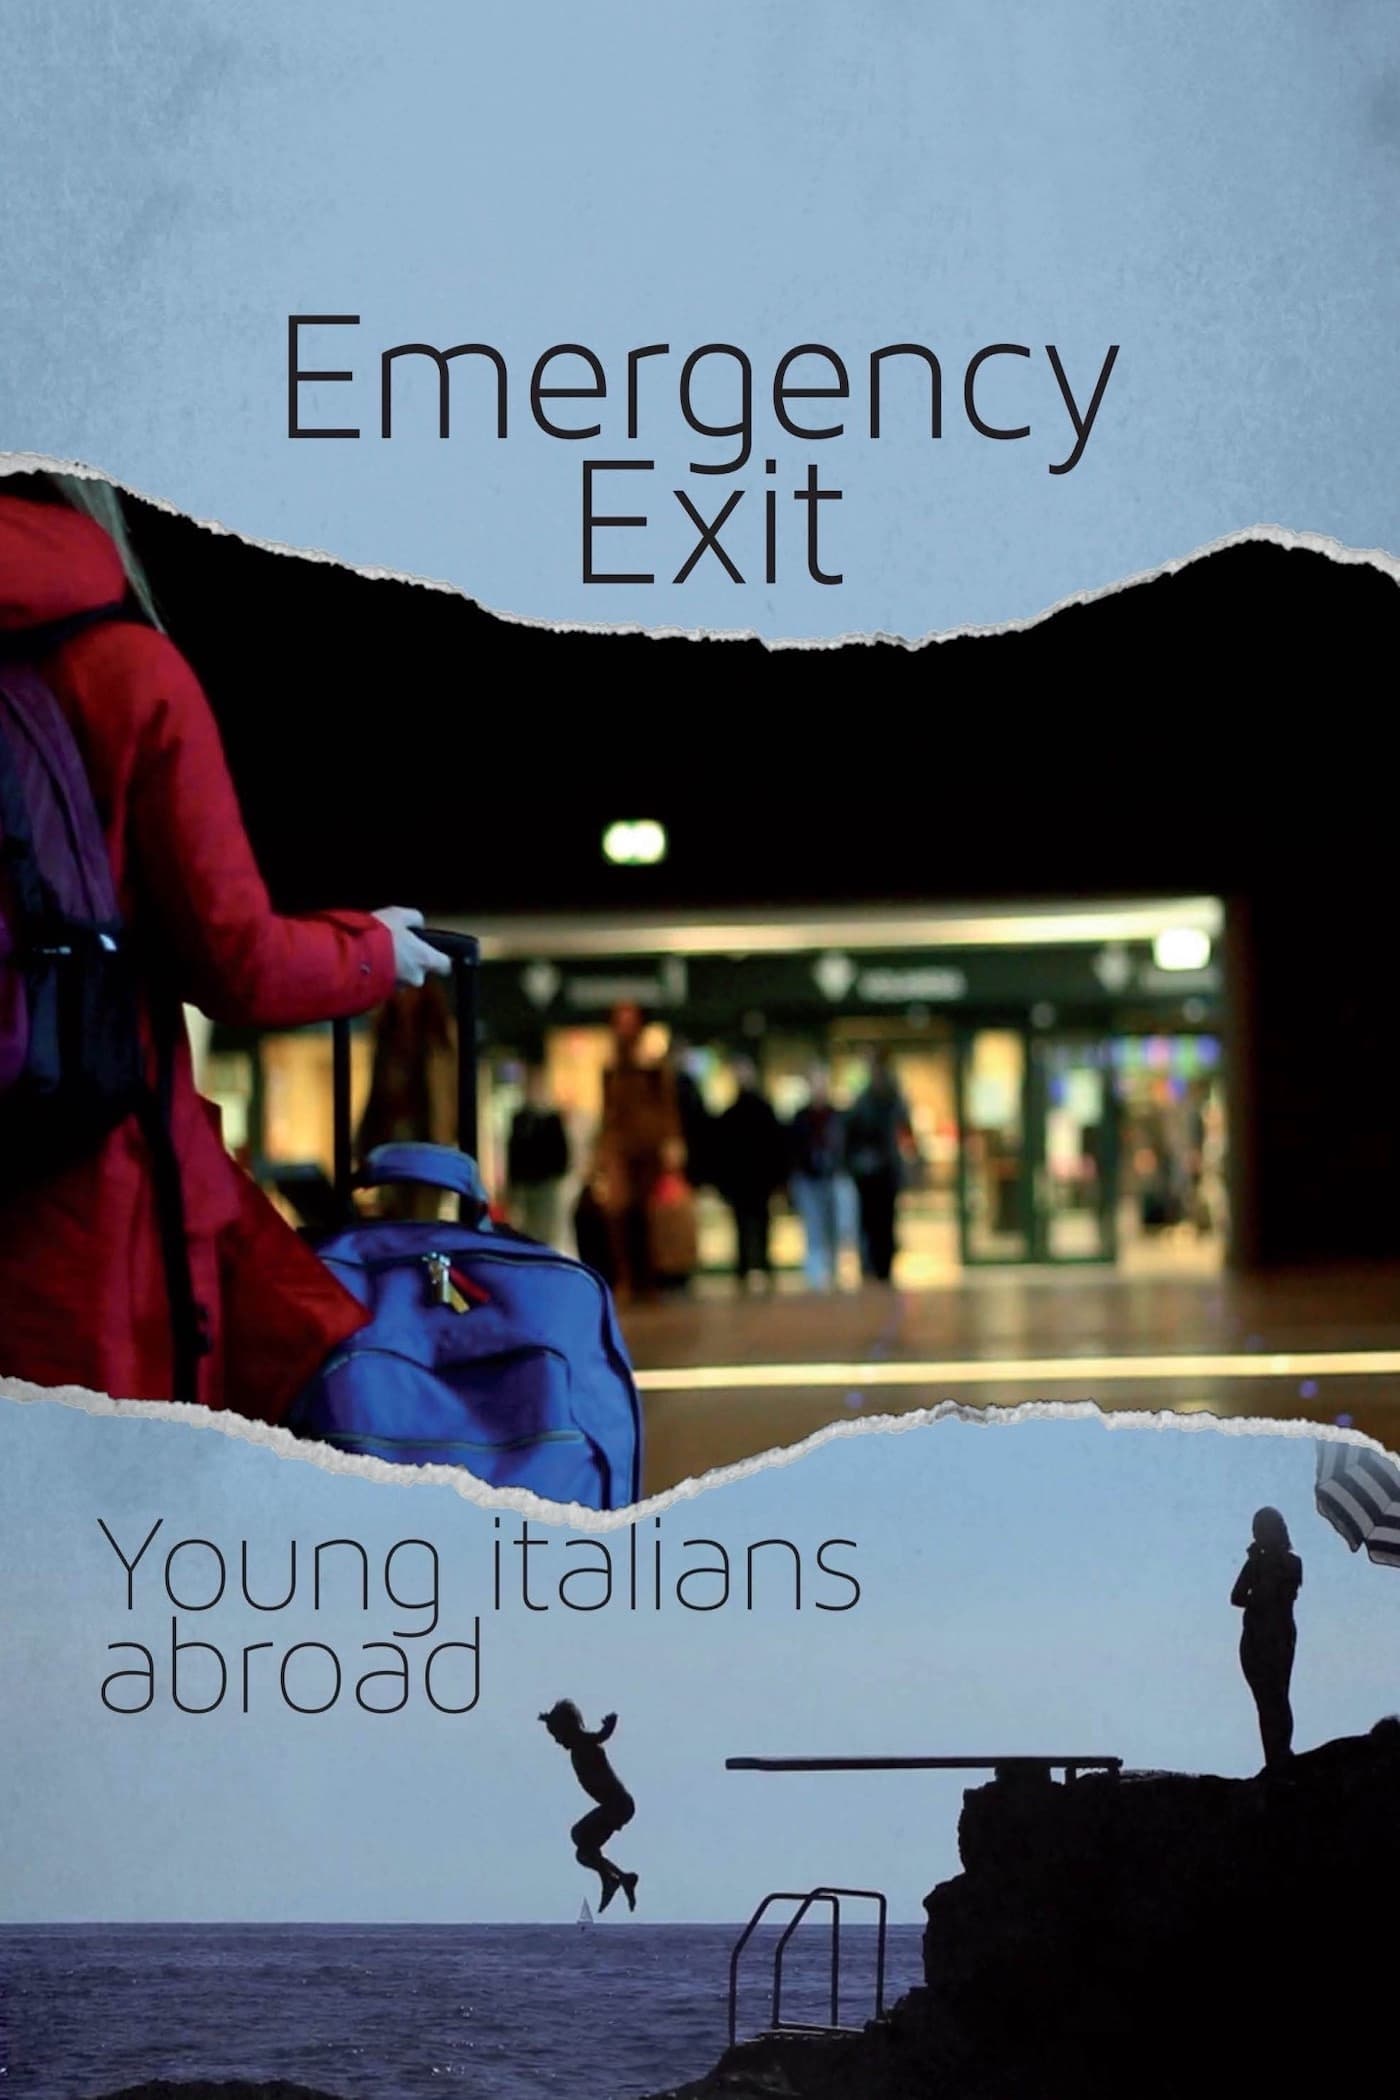 Emergency Exit: Young Italians Abroad